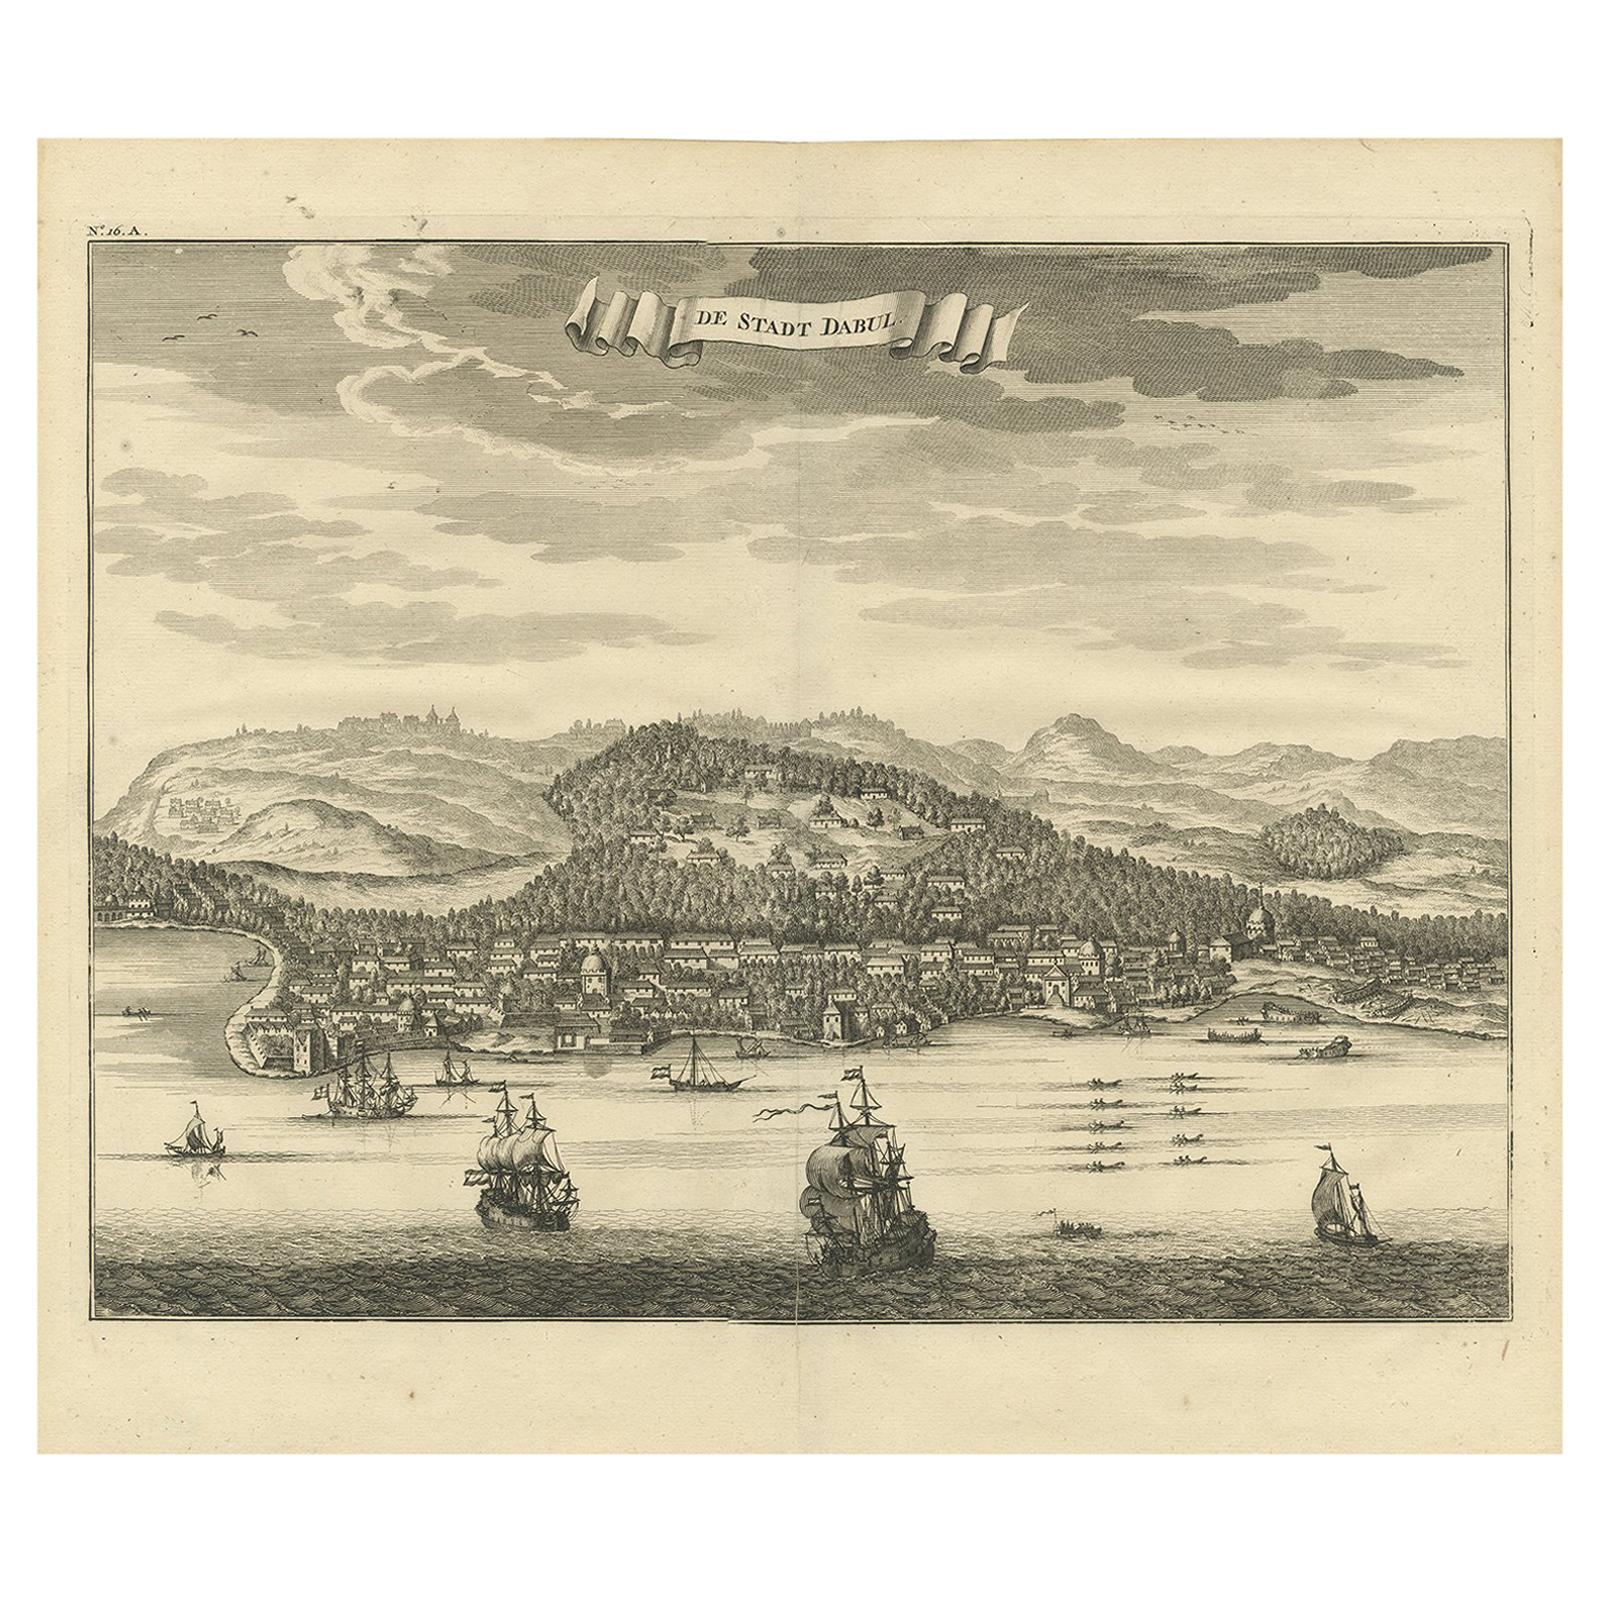 Antique Print of the City of Dabhol 'India' by Valentijn '1726'